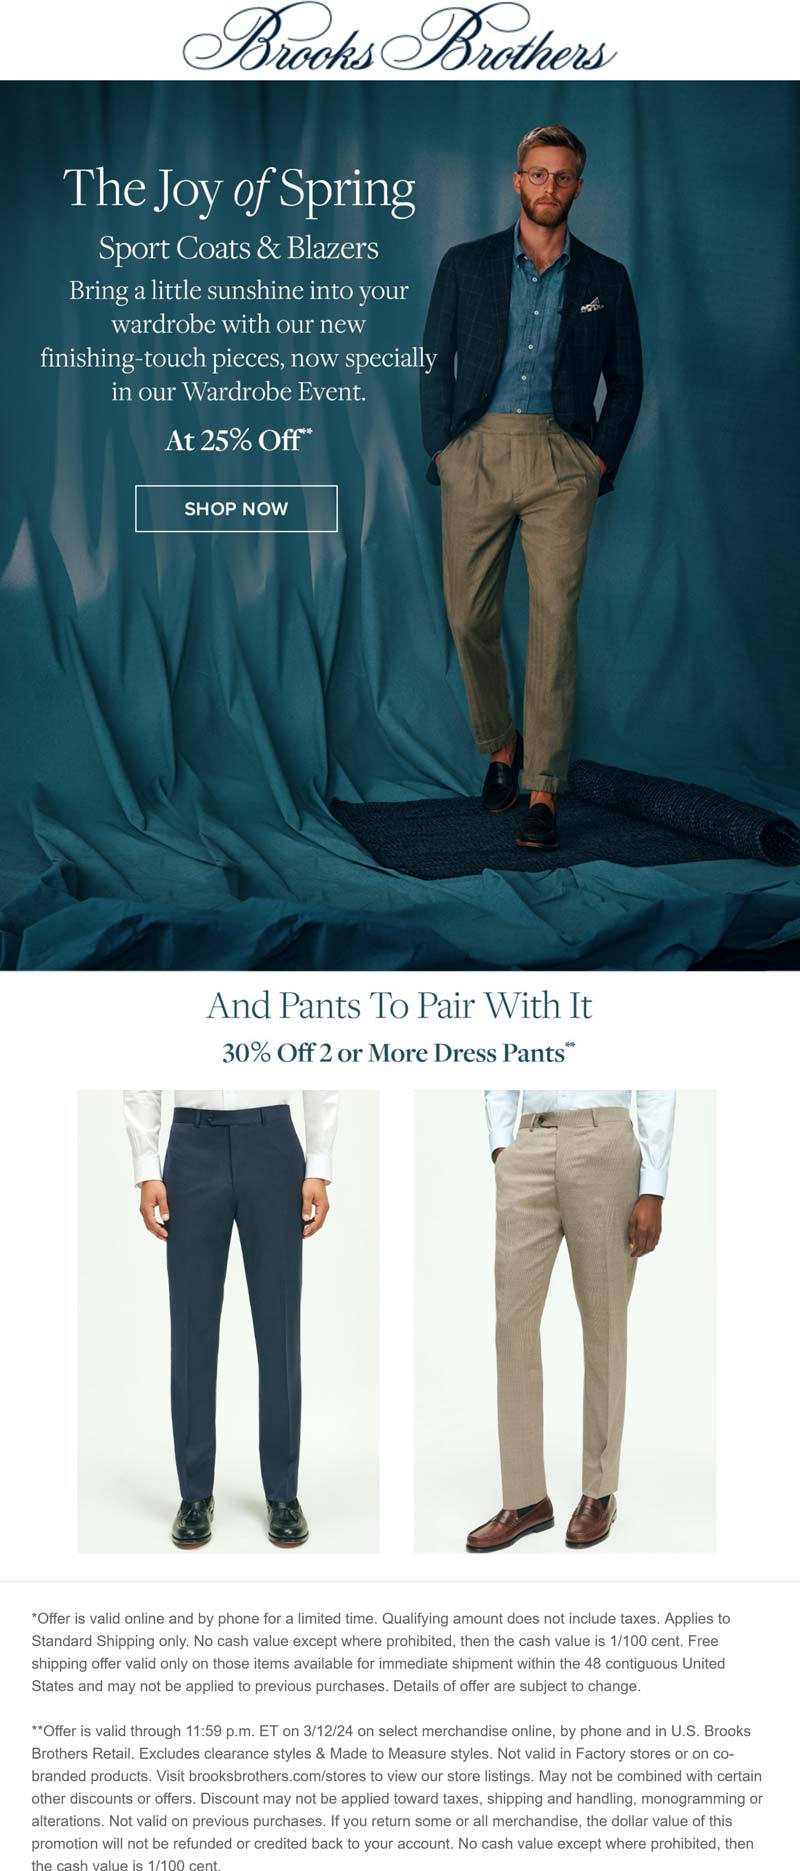 Brooks Brothers stores Coupon  25% off sport coats & blazers at Brooks Brothers, also 30% off 2+ dress pants #brooksbrothers 